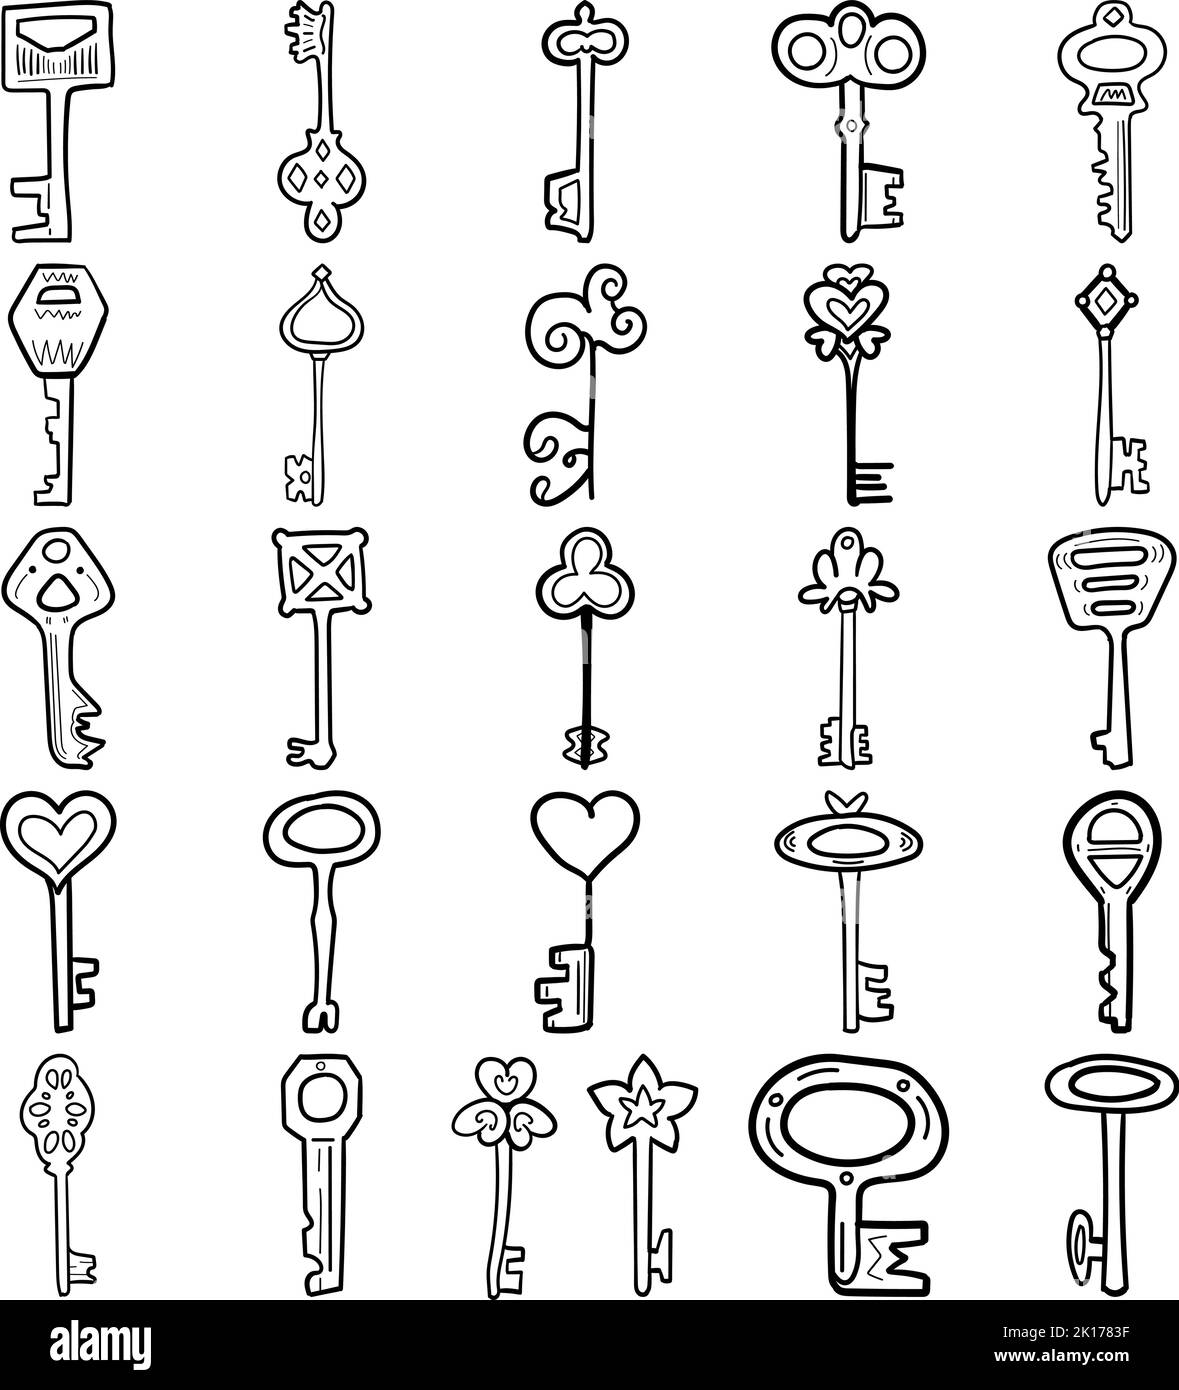 Keys to Drawing – Project 2C – Free Hand Drawings - Keith